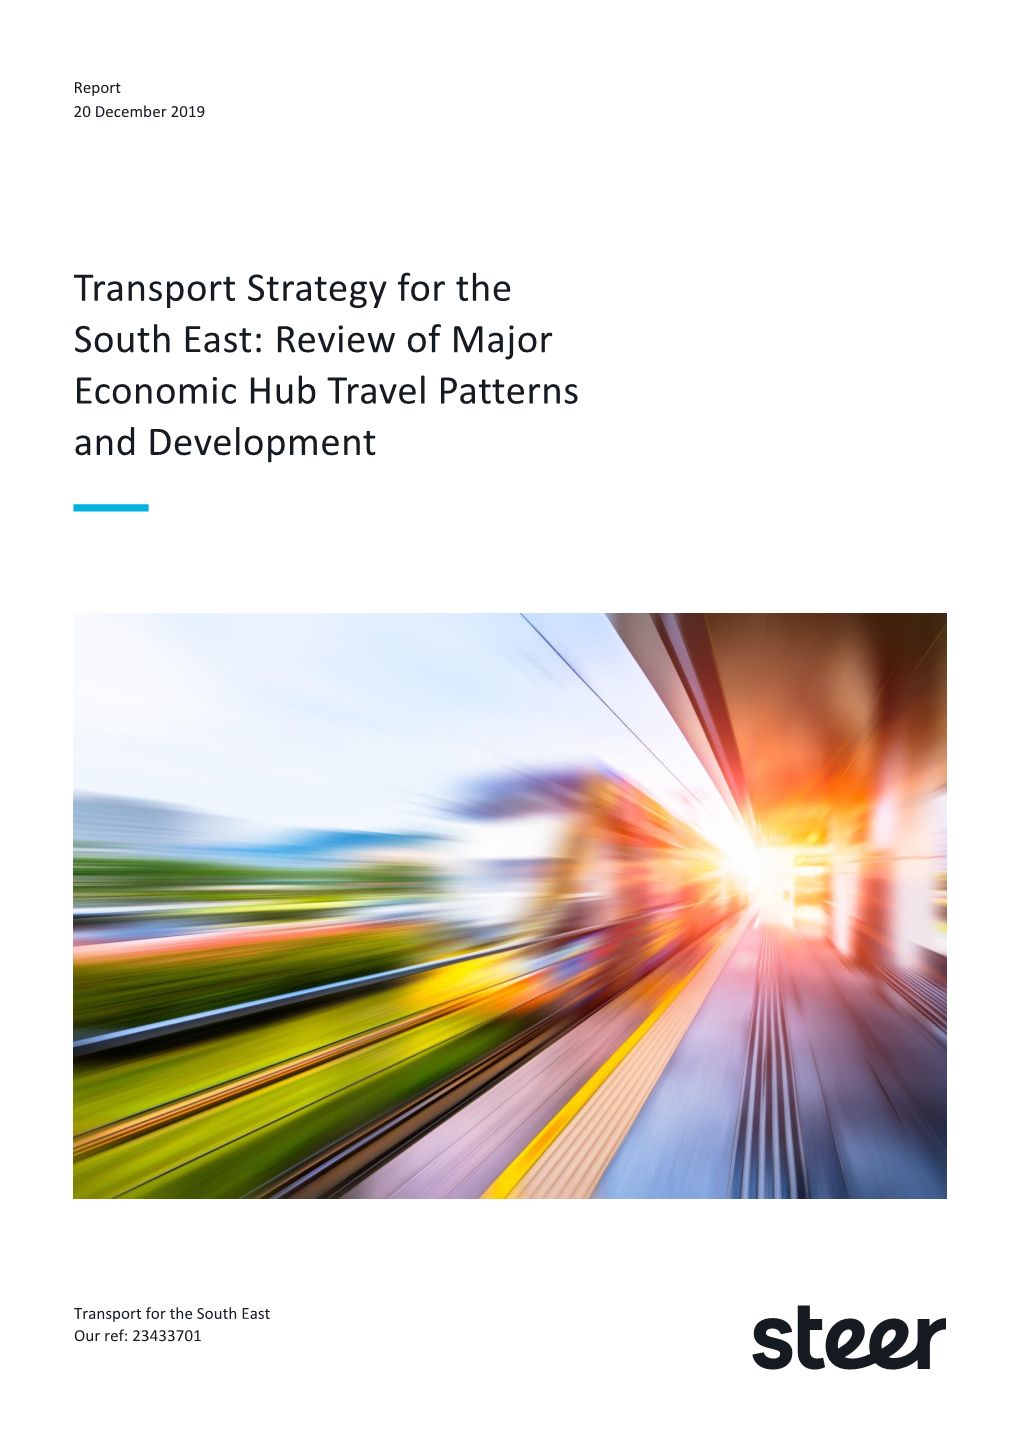 Review of Major Economic Hub Travel Patterns and Development